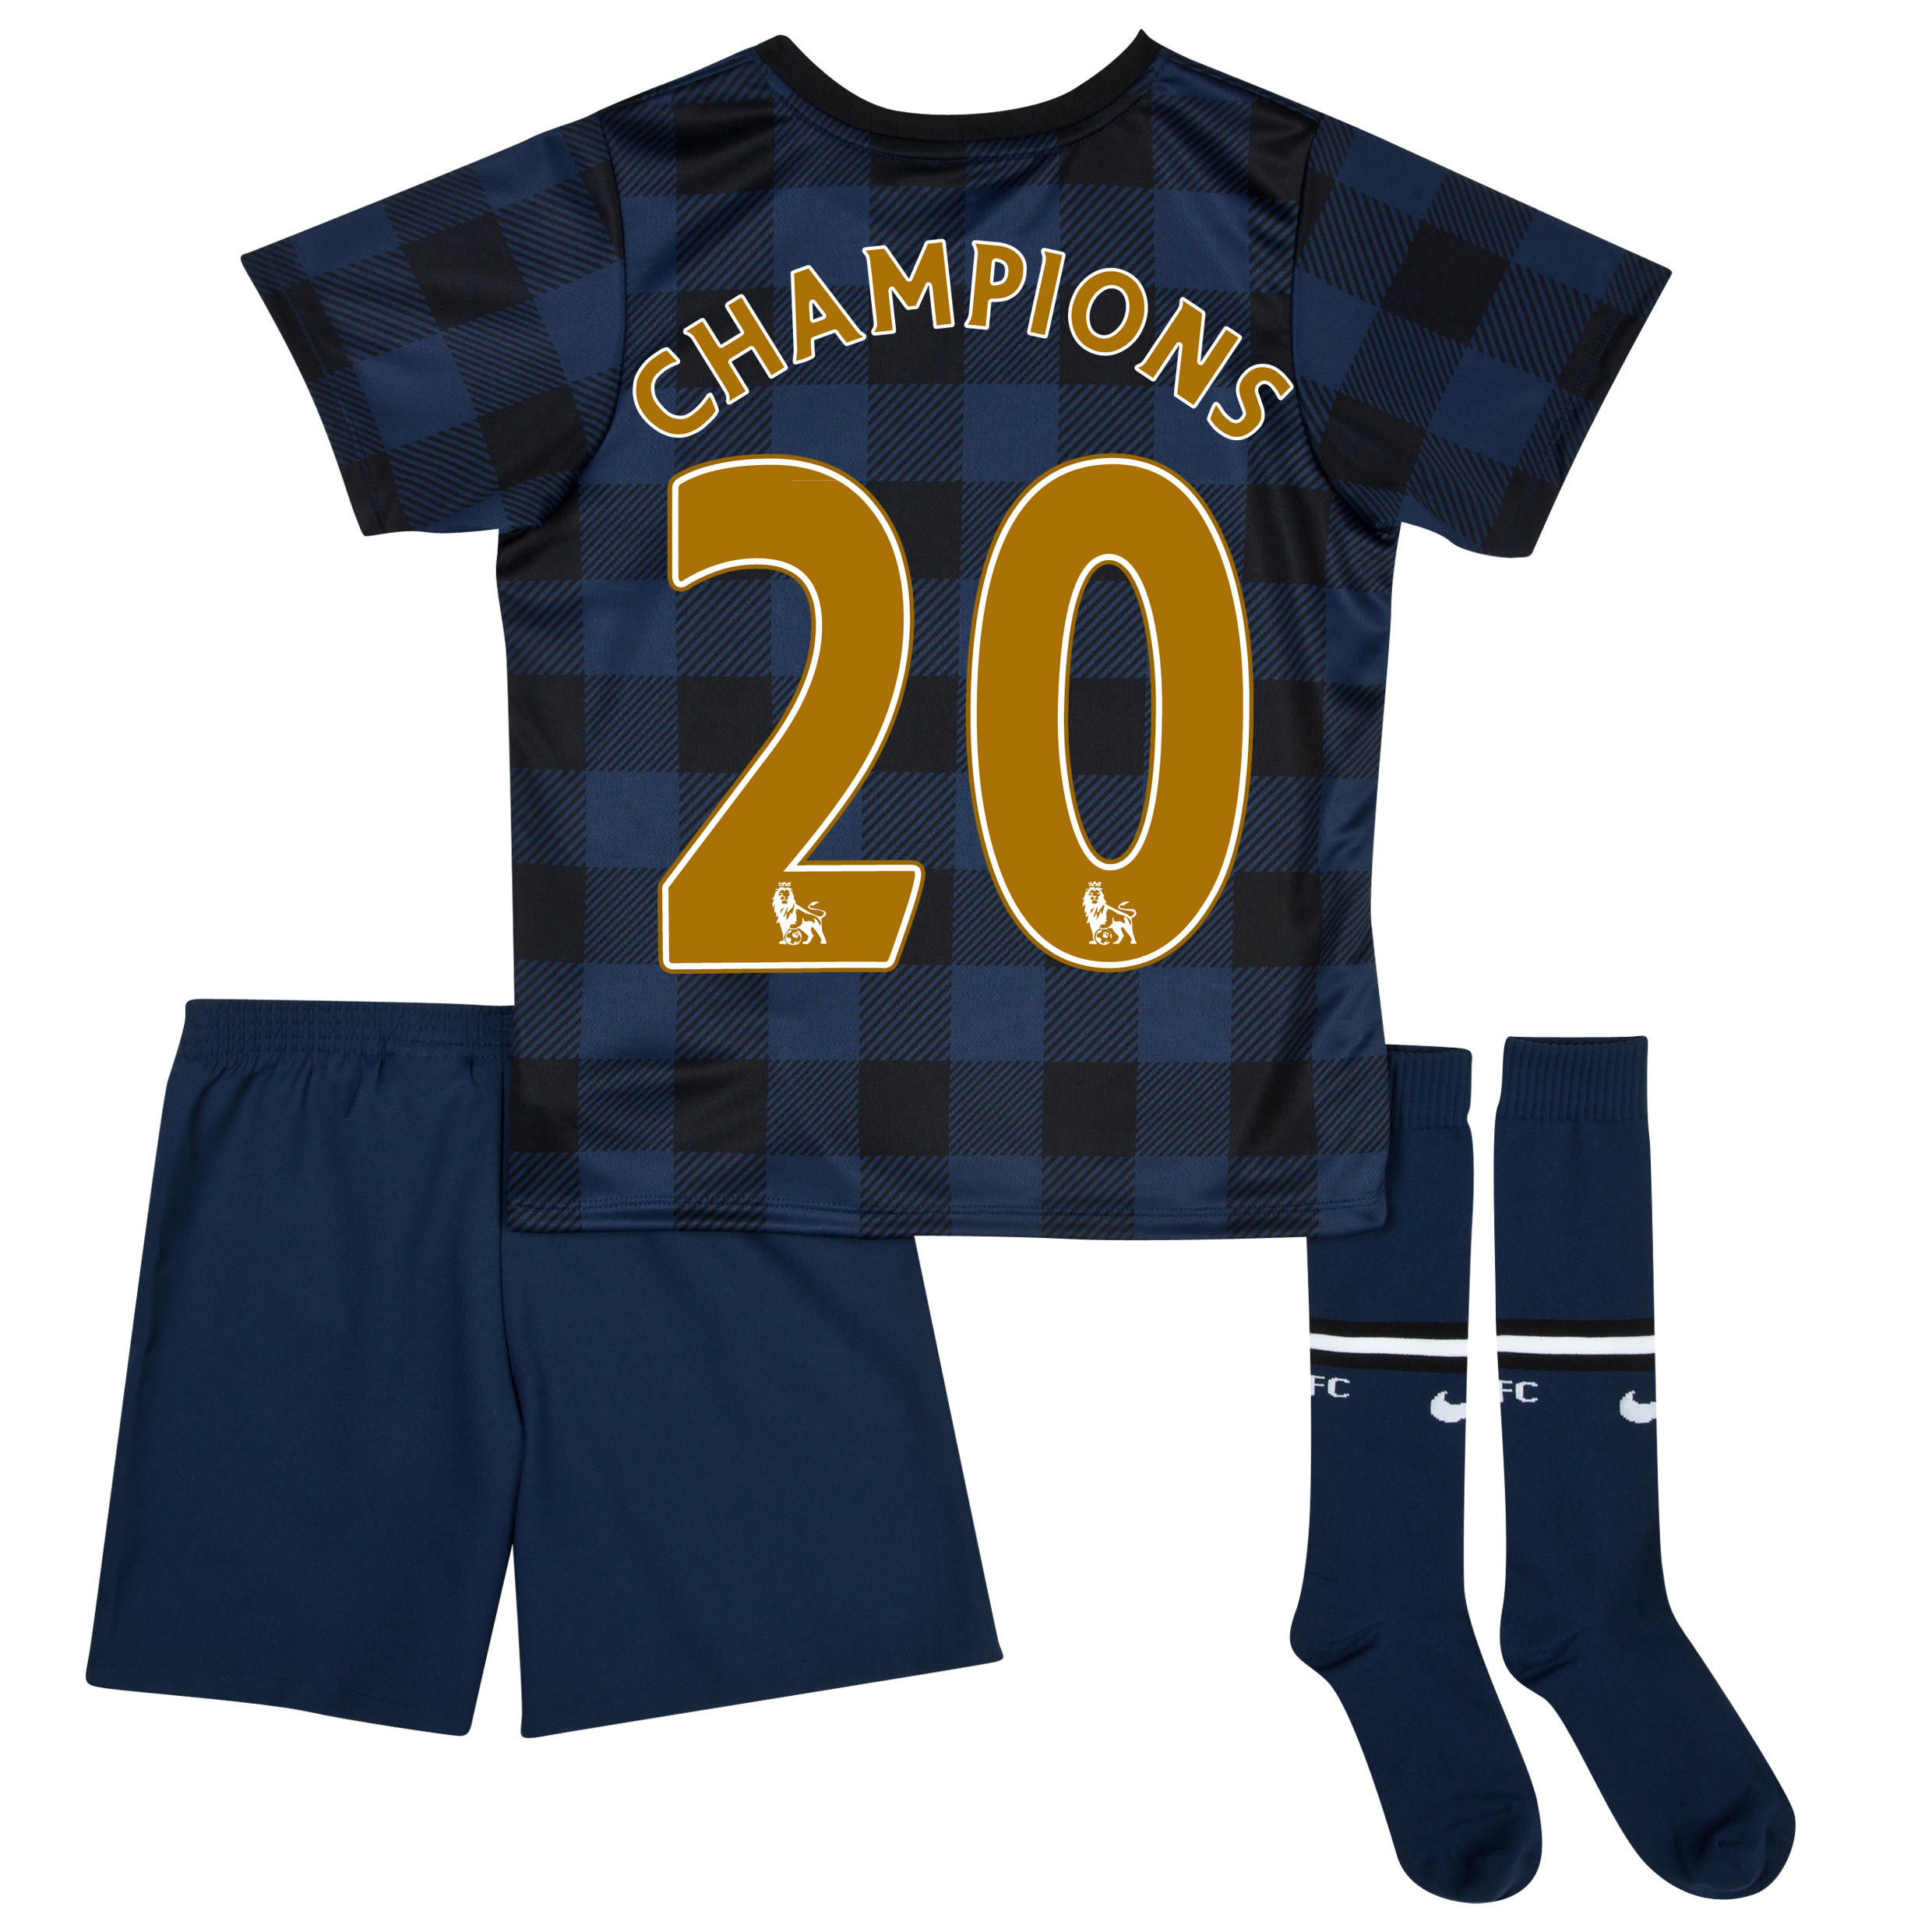 Manchester United Away Kit 2013/14 - Little Boys with Champions 20 printing